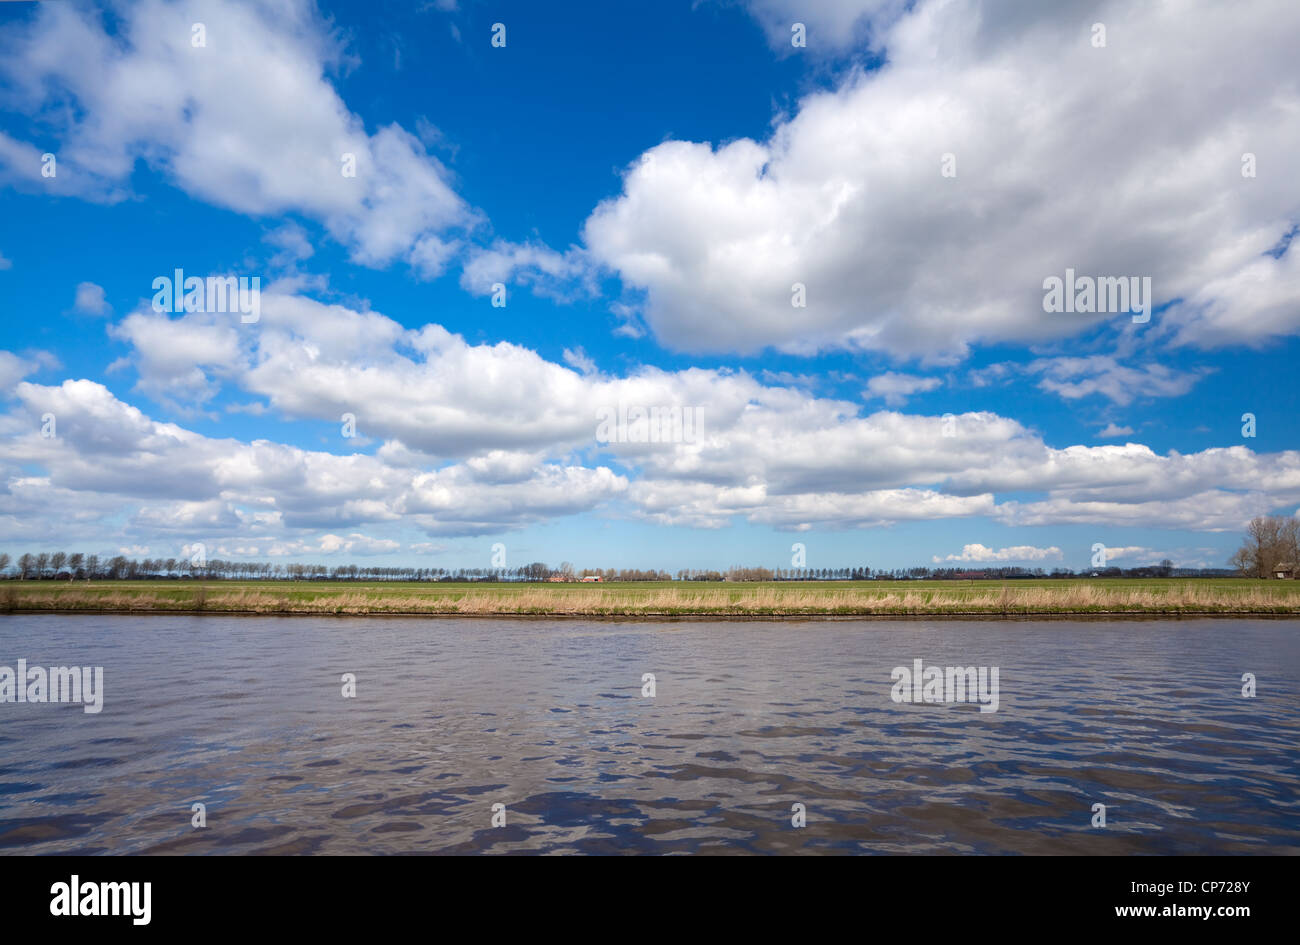 lines of land, water and blue sky with blue puffy clouds Stock Photo